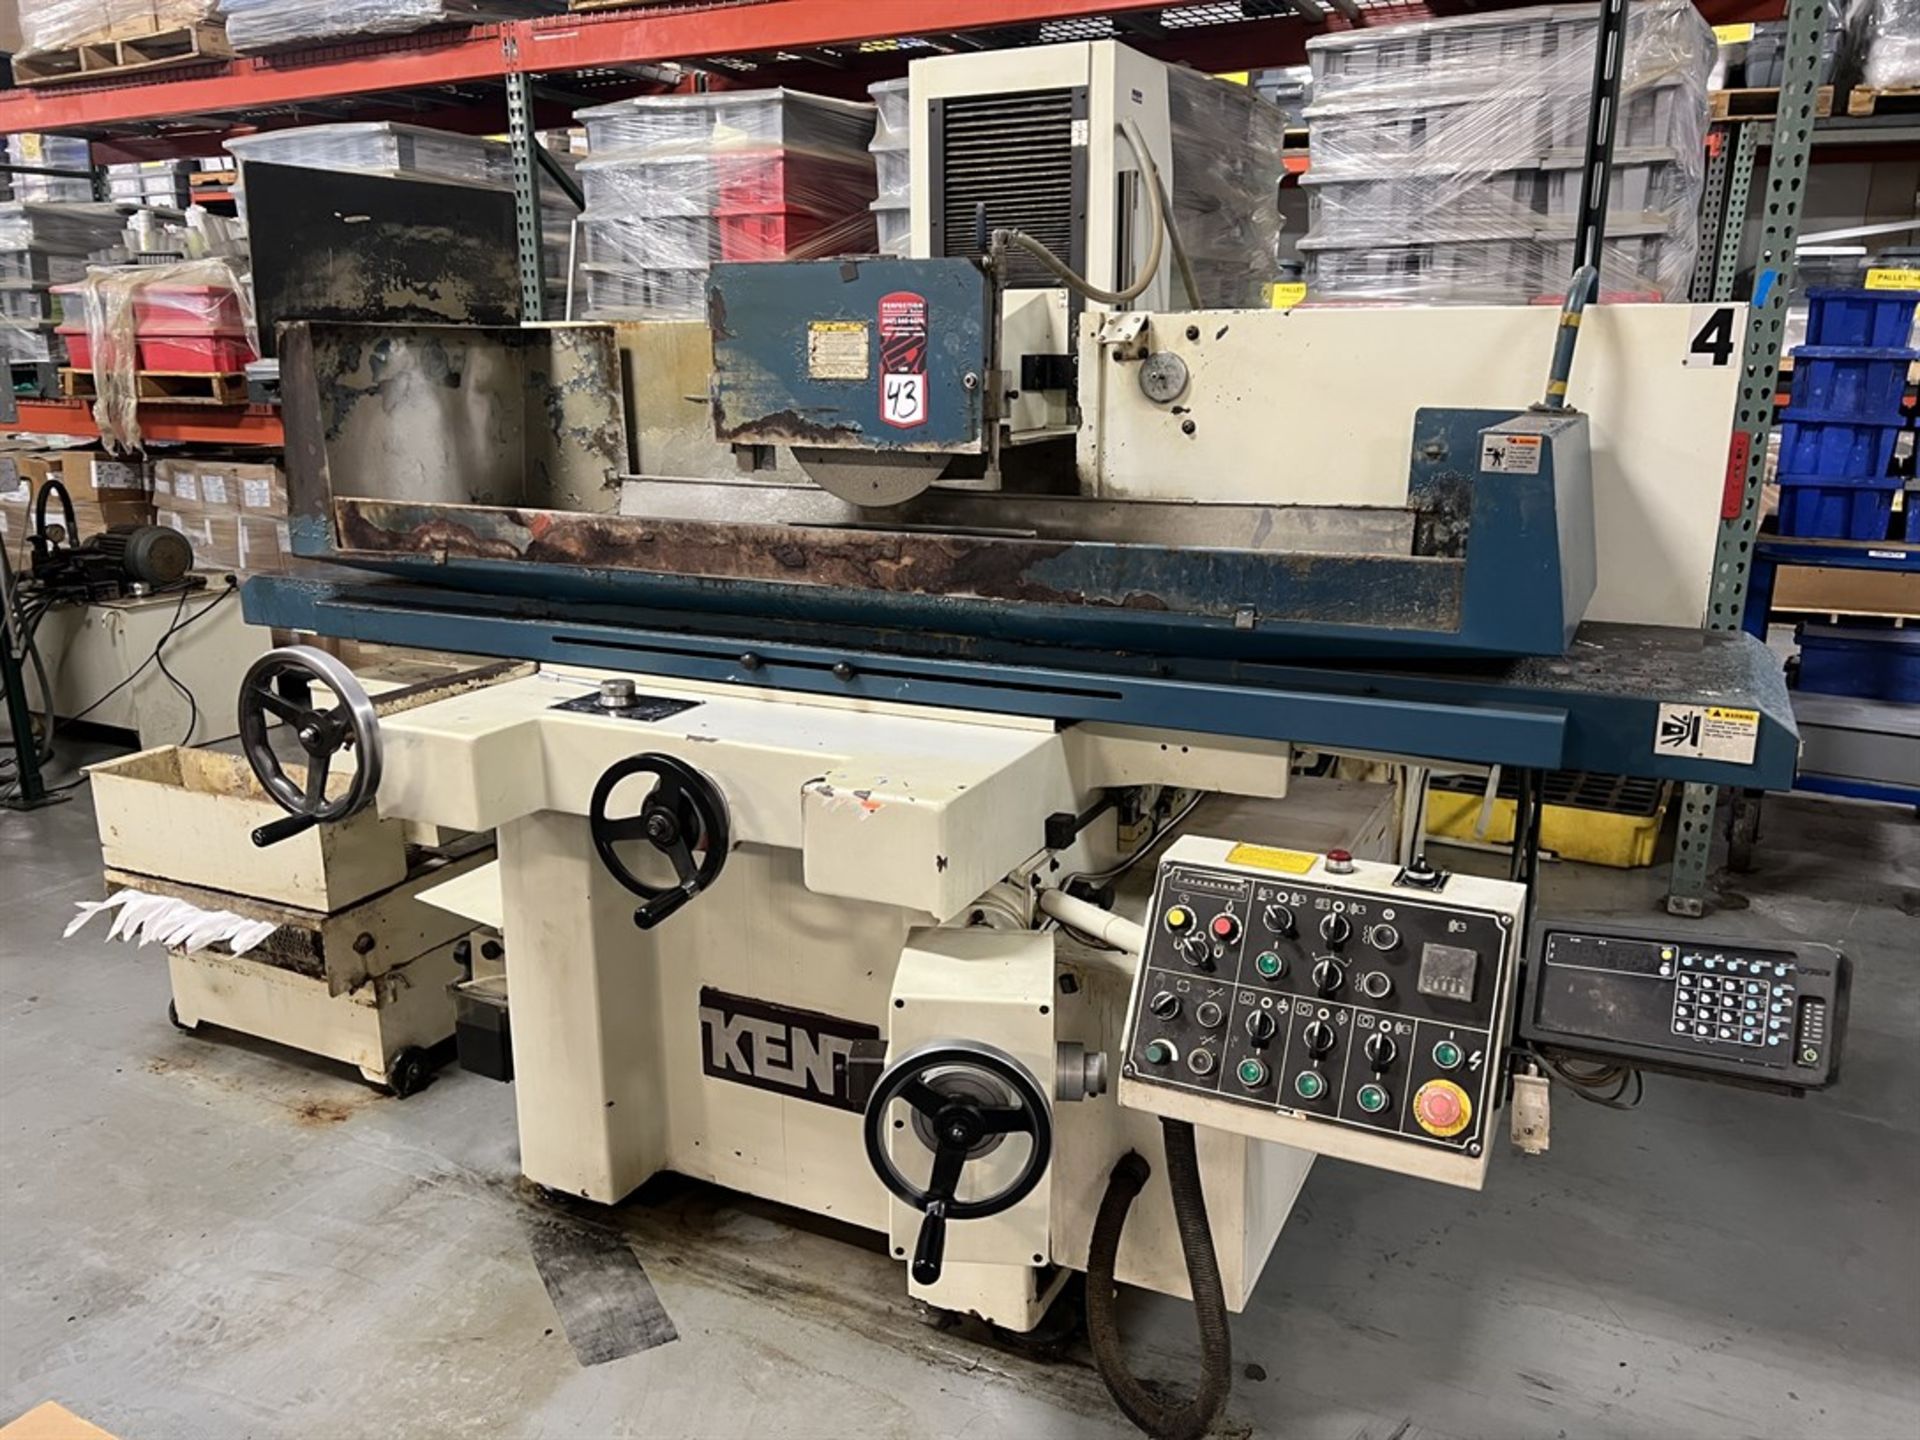 2009 KENT A KGS-84AHD Automatic Precision Surface Grinder, s/n 086804, 15.75” x 31.5” Magnetic - Image 2 of 8